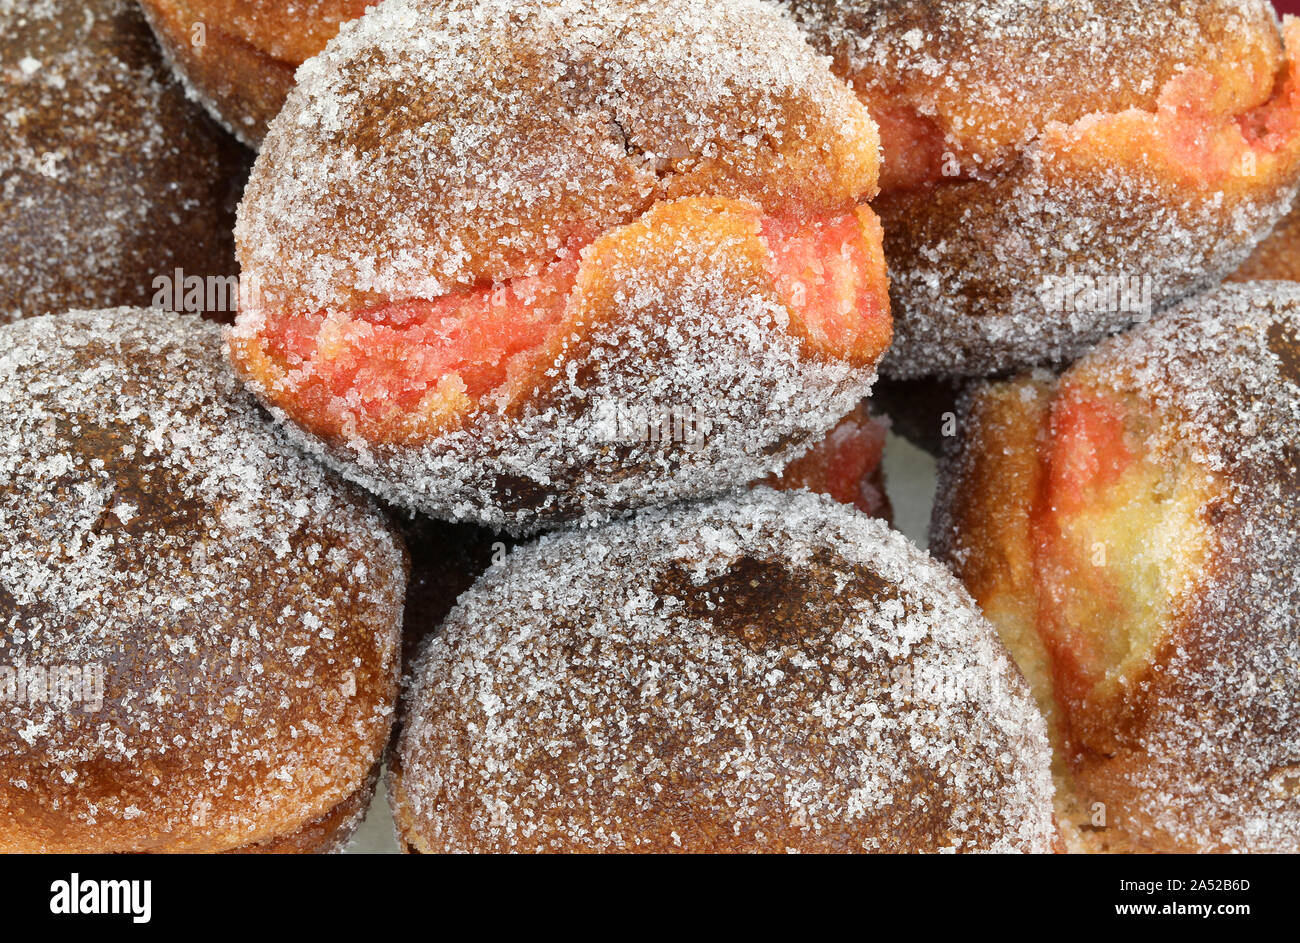 background of many big krapfen with jam alchermes or Alkermes for sale at pastry shop Stock Photo